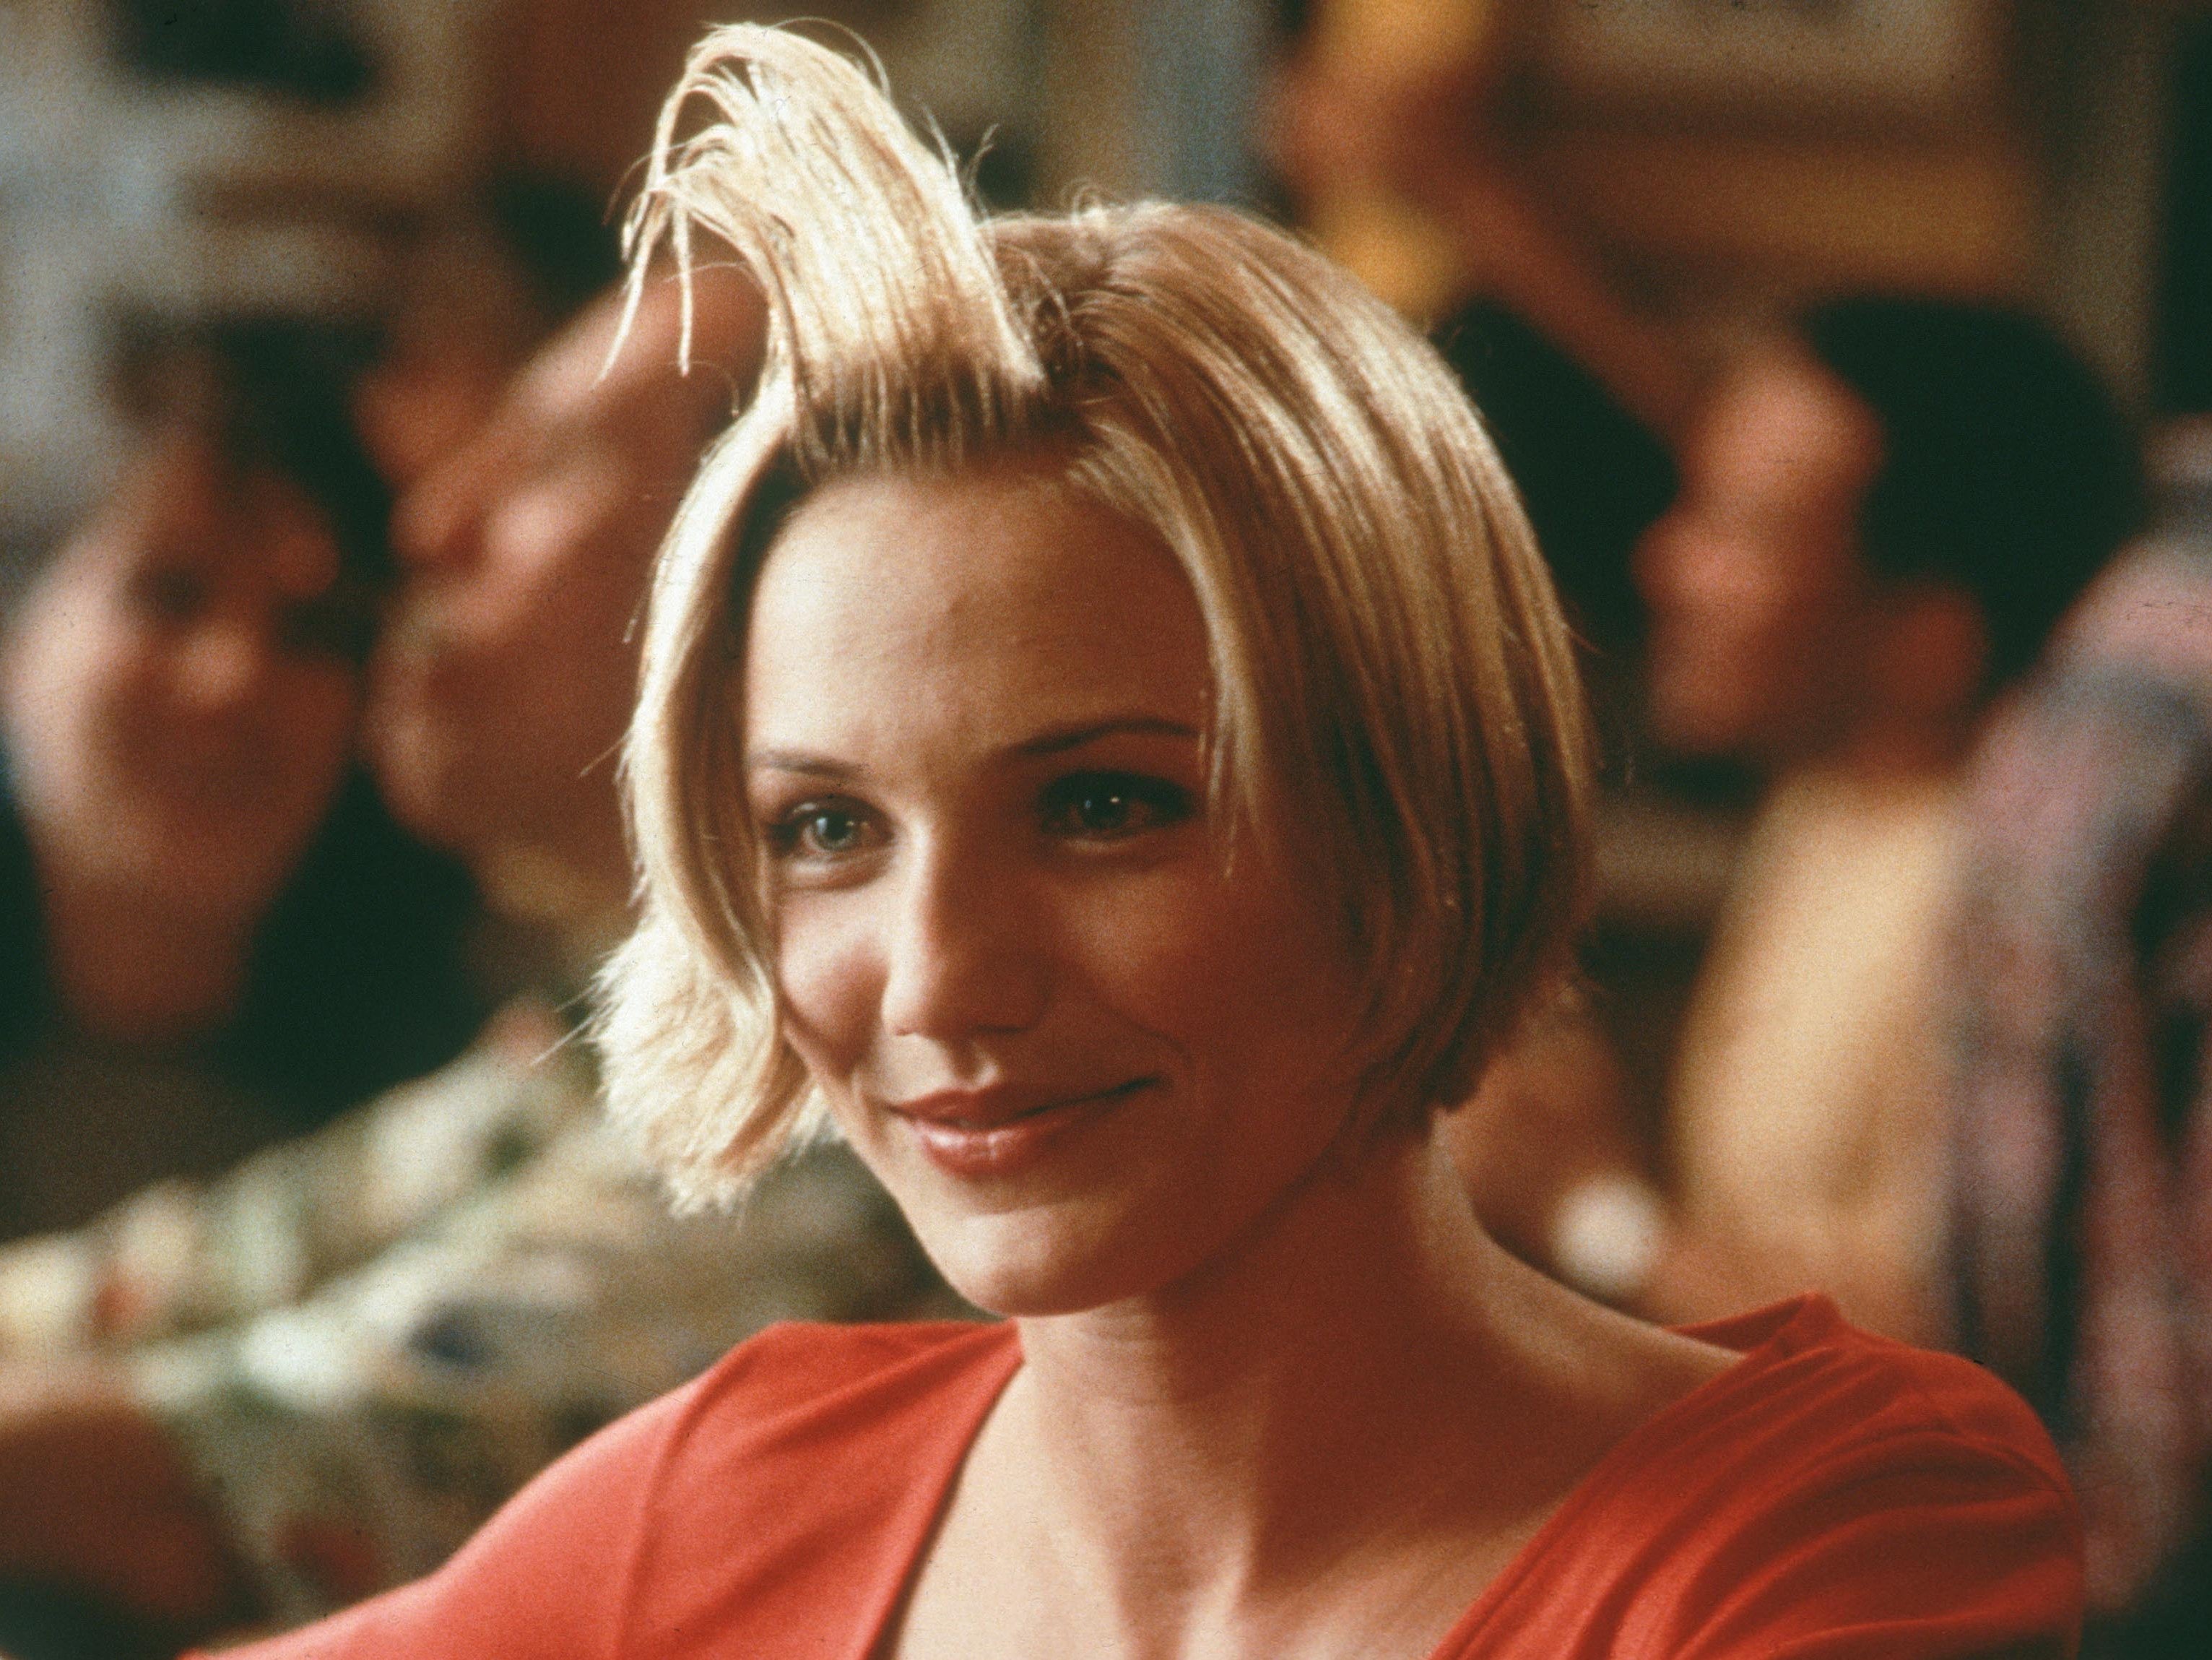 Cameron Diaz and her quiff in ‘There’s Something About Mary’